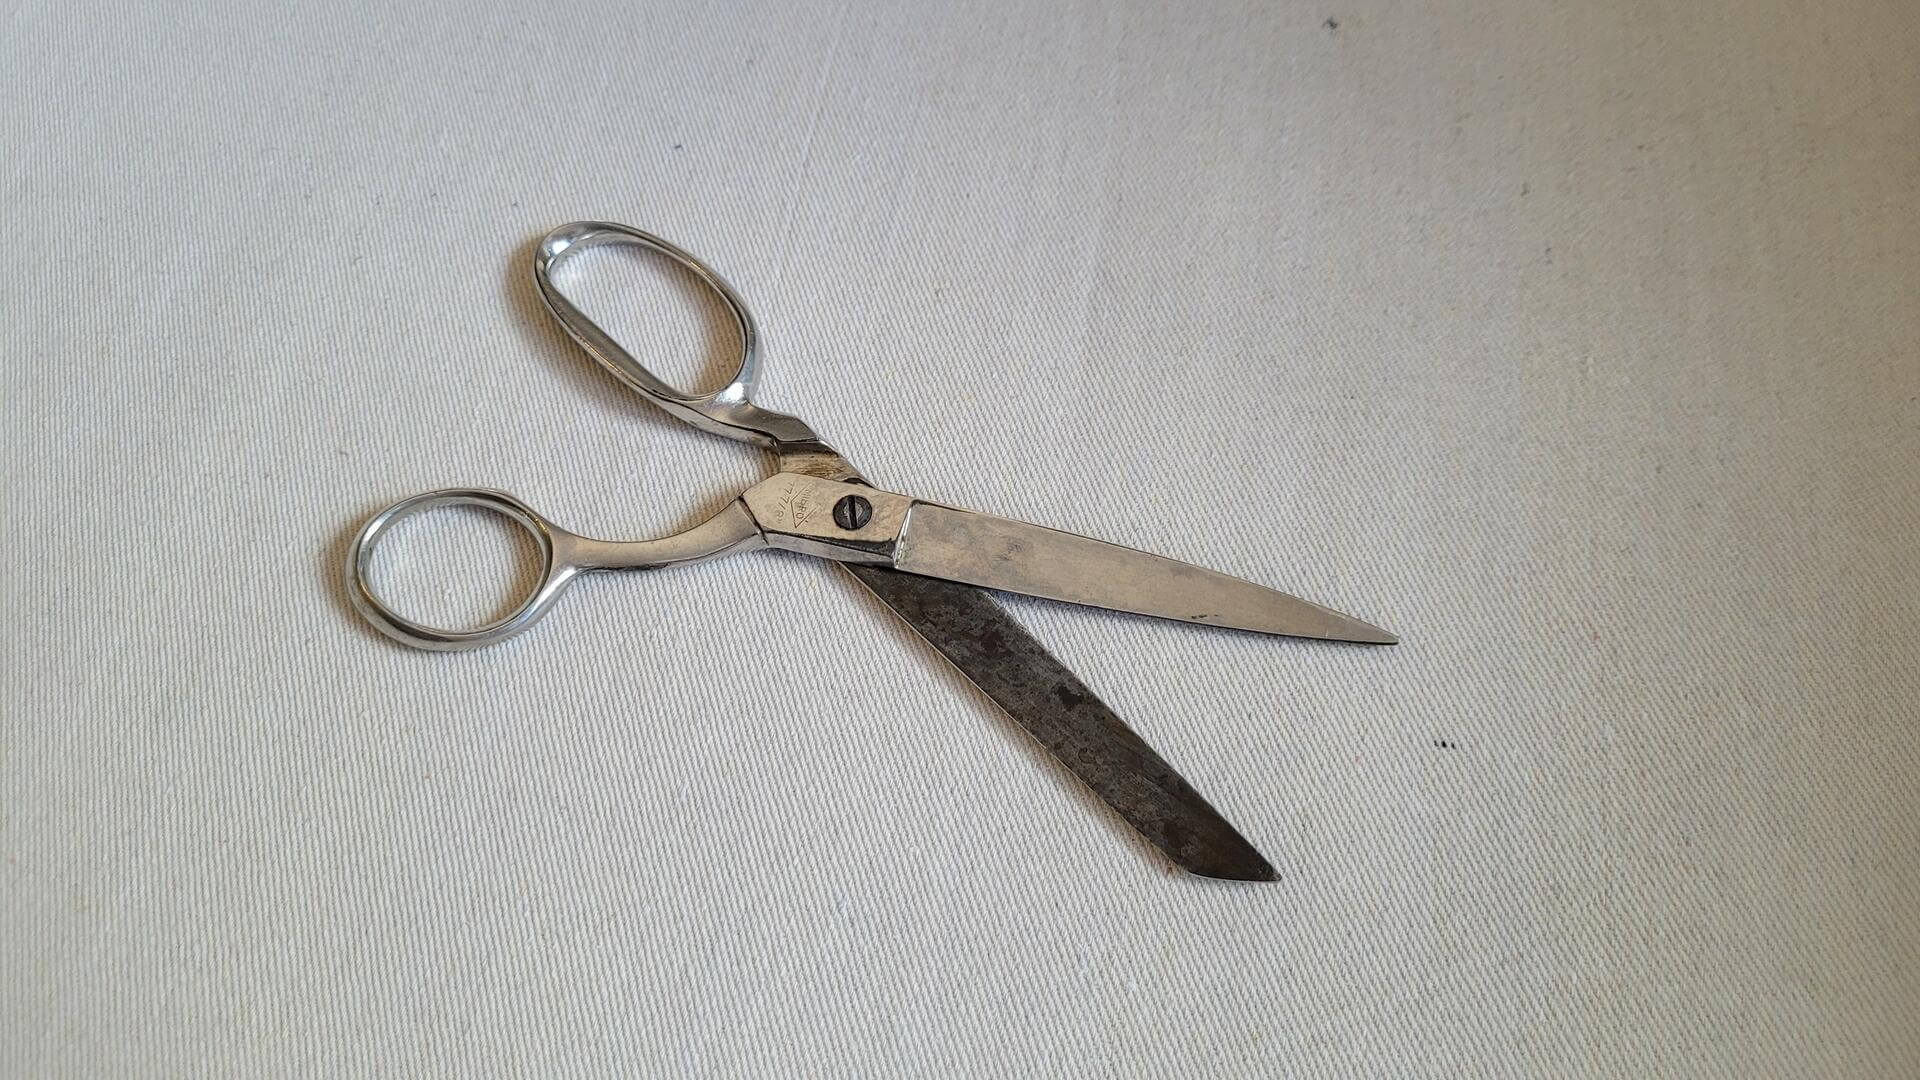 Rare pair of Mibro sewing scissors shears 8 inches long. Vintage made in Germany upholstery and seamstress fabric cutting tools